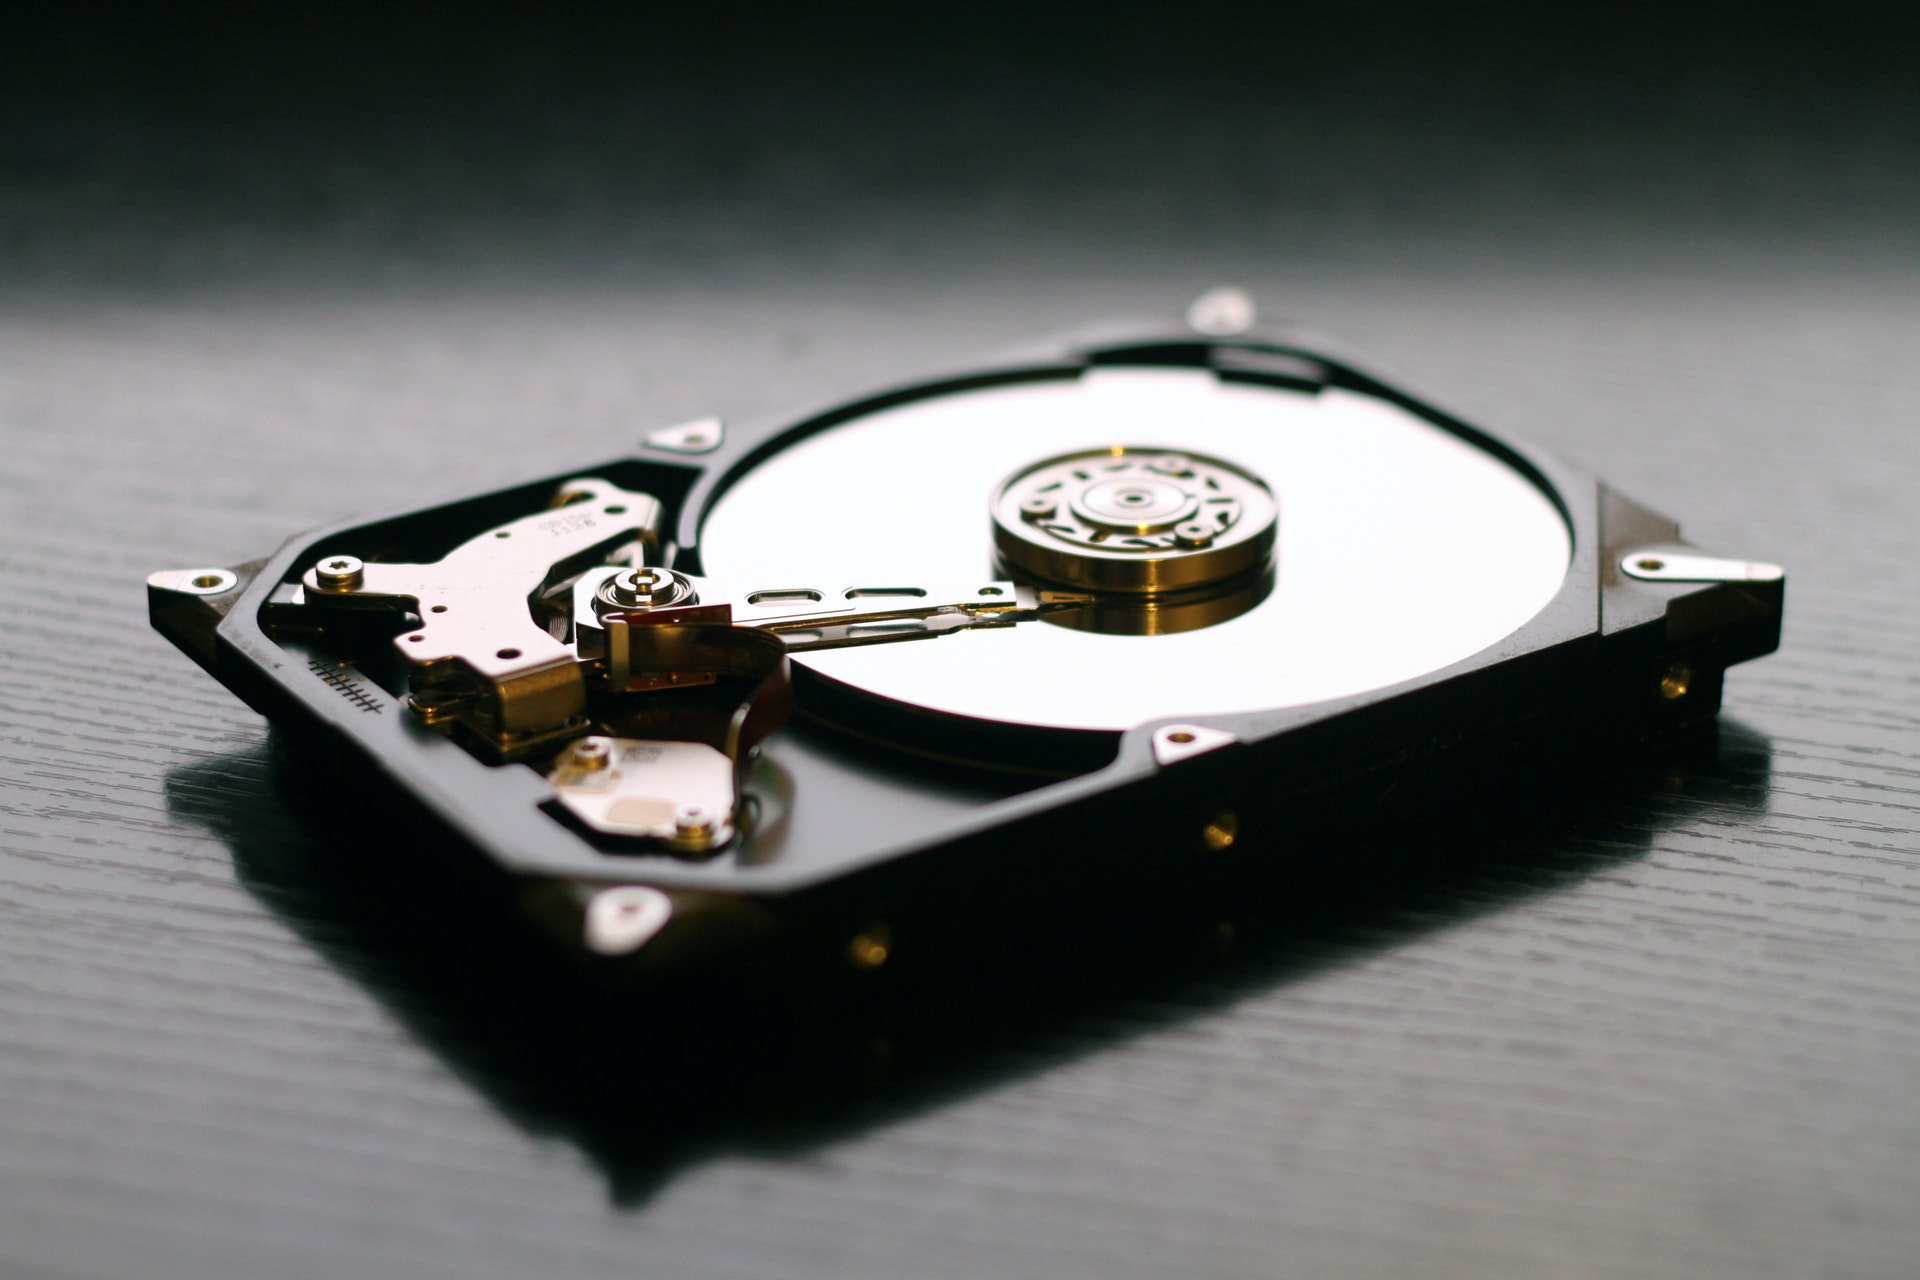 Reasons You Need to Install an Additional hard drive to Your PC